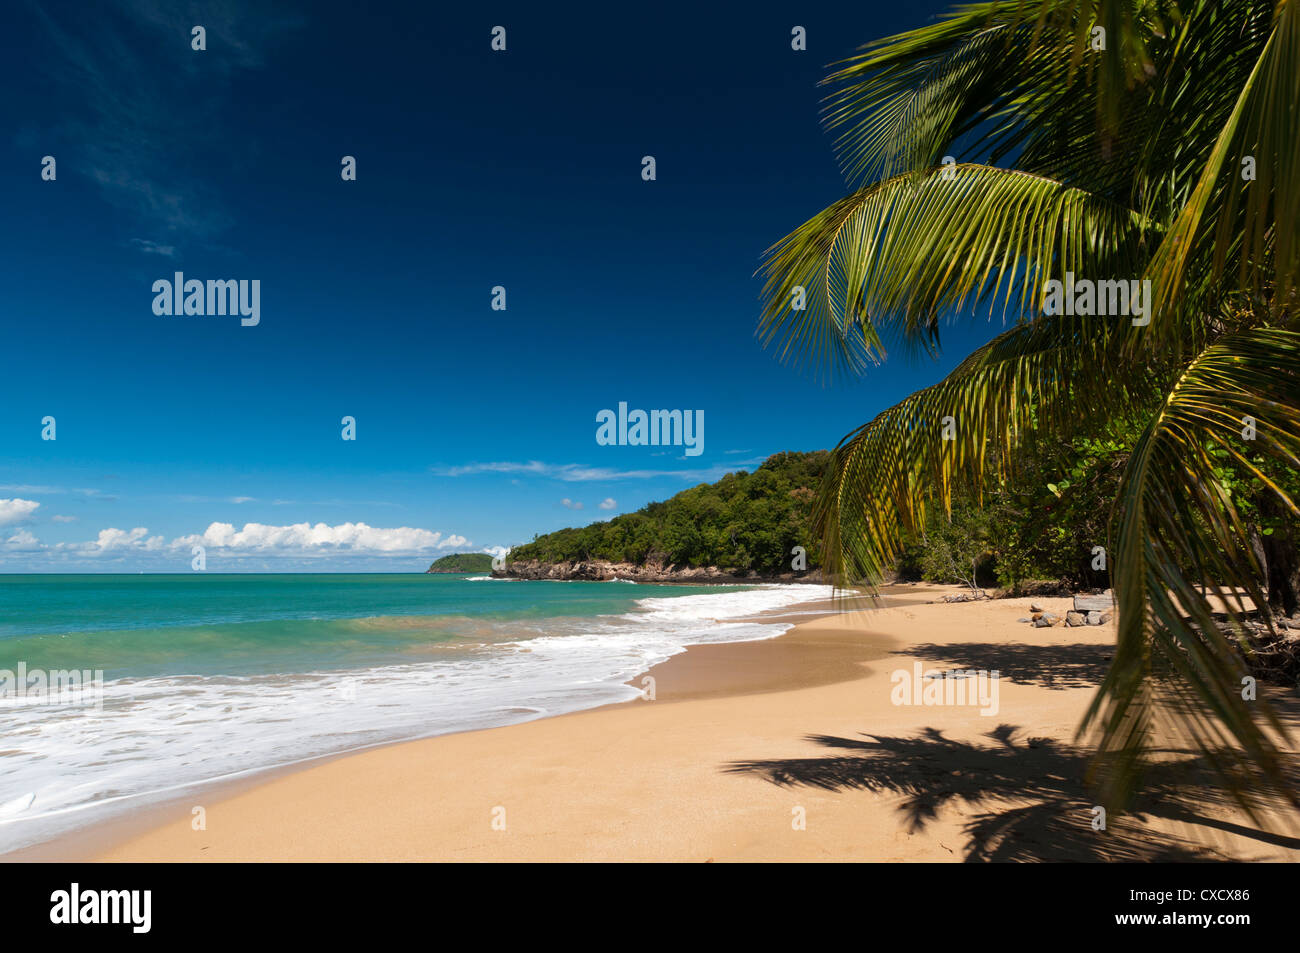 La Perle Beach, Deshaies, Basse-Terre, Guadeloupe, French Caribbean, France, West Indies, Central America Stock Photo